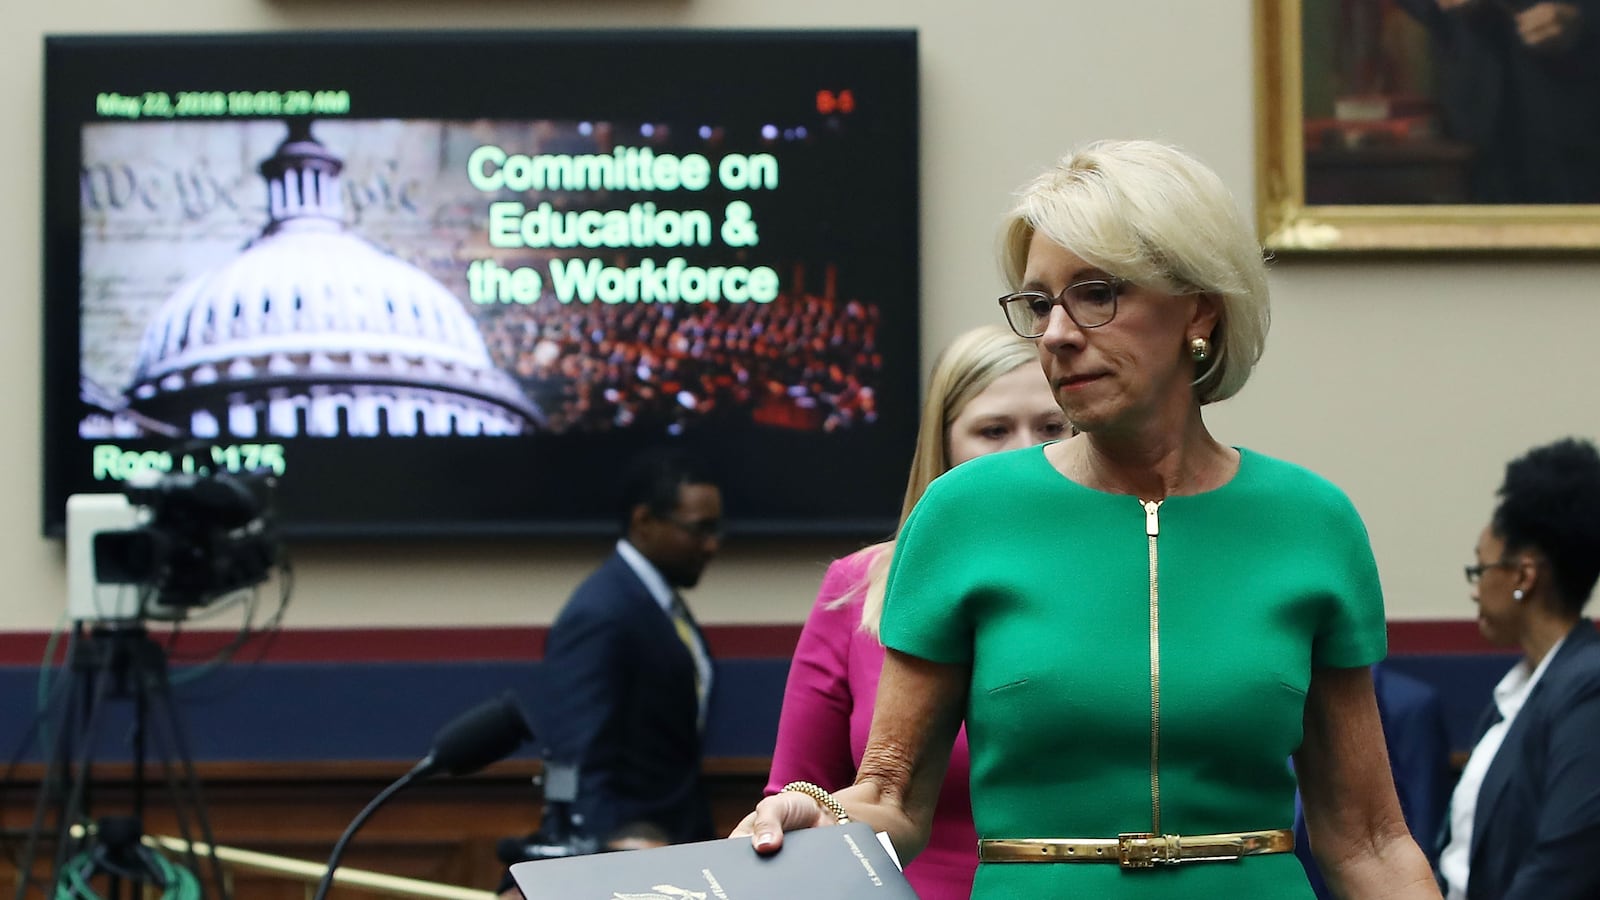 WASHINGTON, DC - MAY 22:  Education Secretary Betsy DeVos arrives to testify before a House House Education and the Workforce Committee on Capitol Hill, May 22, 2018 in Washington, DC. The hearing focus is on examining the policies and priorities of the U.S. Department of Education.  (Photo by Mark Wilson/Getty Images)